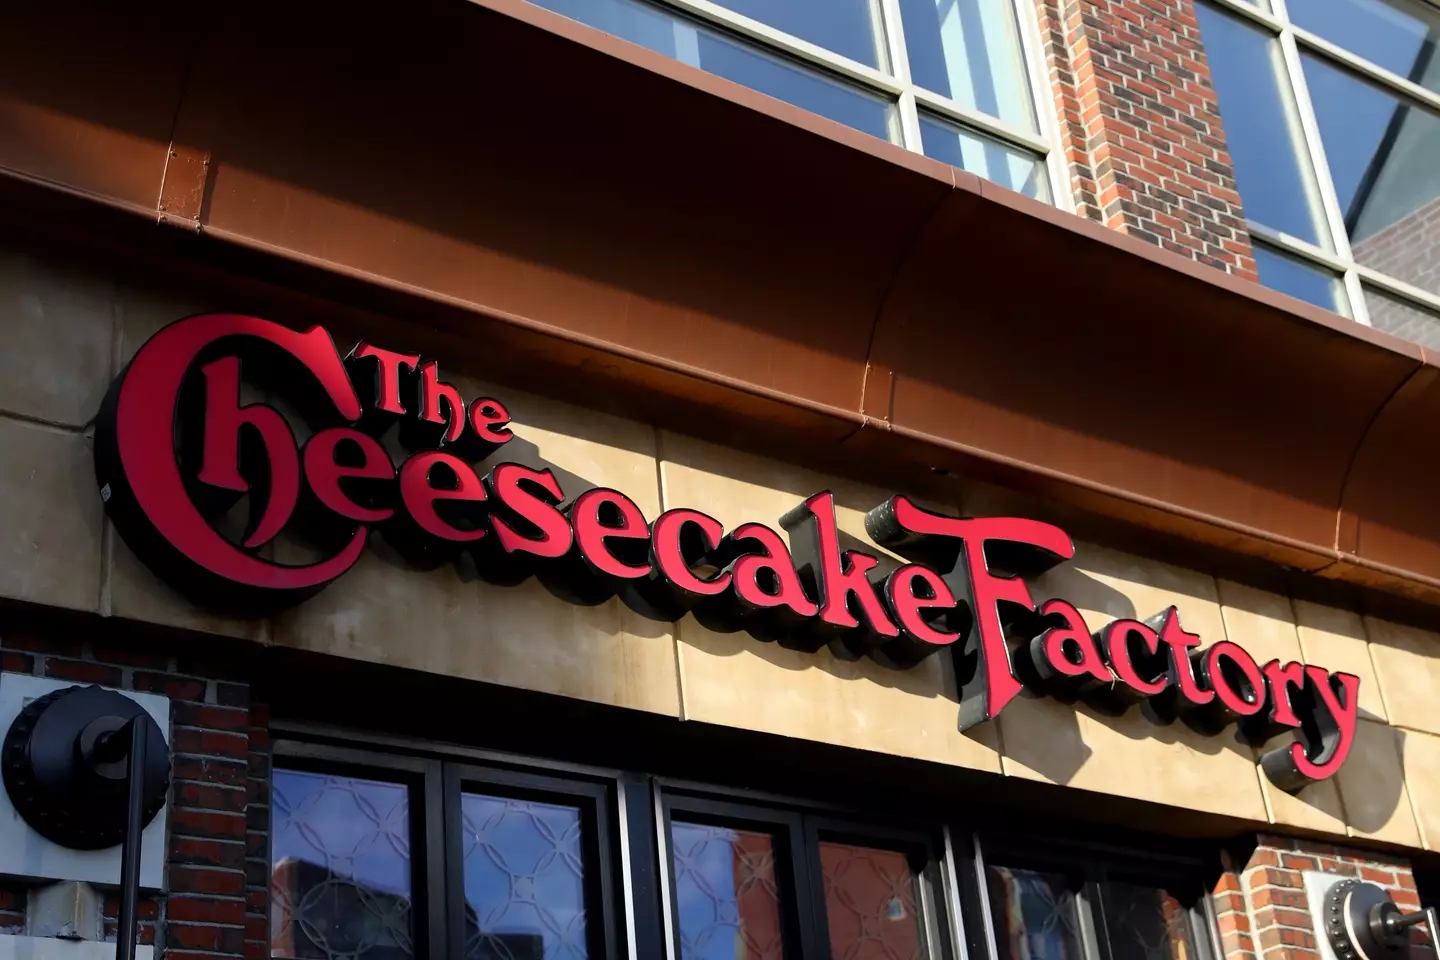 The Cheesecake Factory came under fire from some for being a bad spot for a first date.